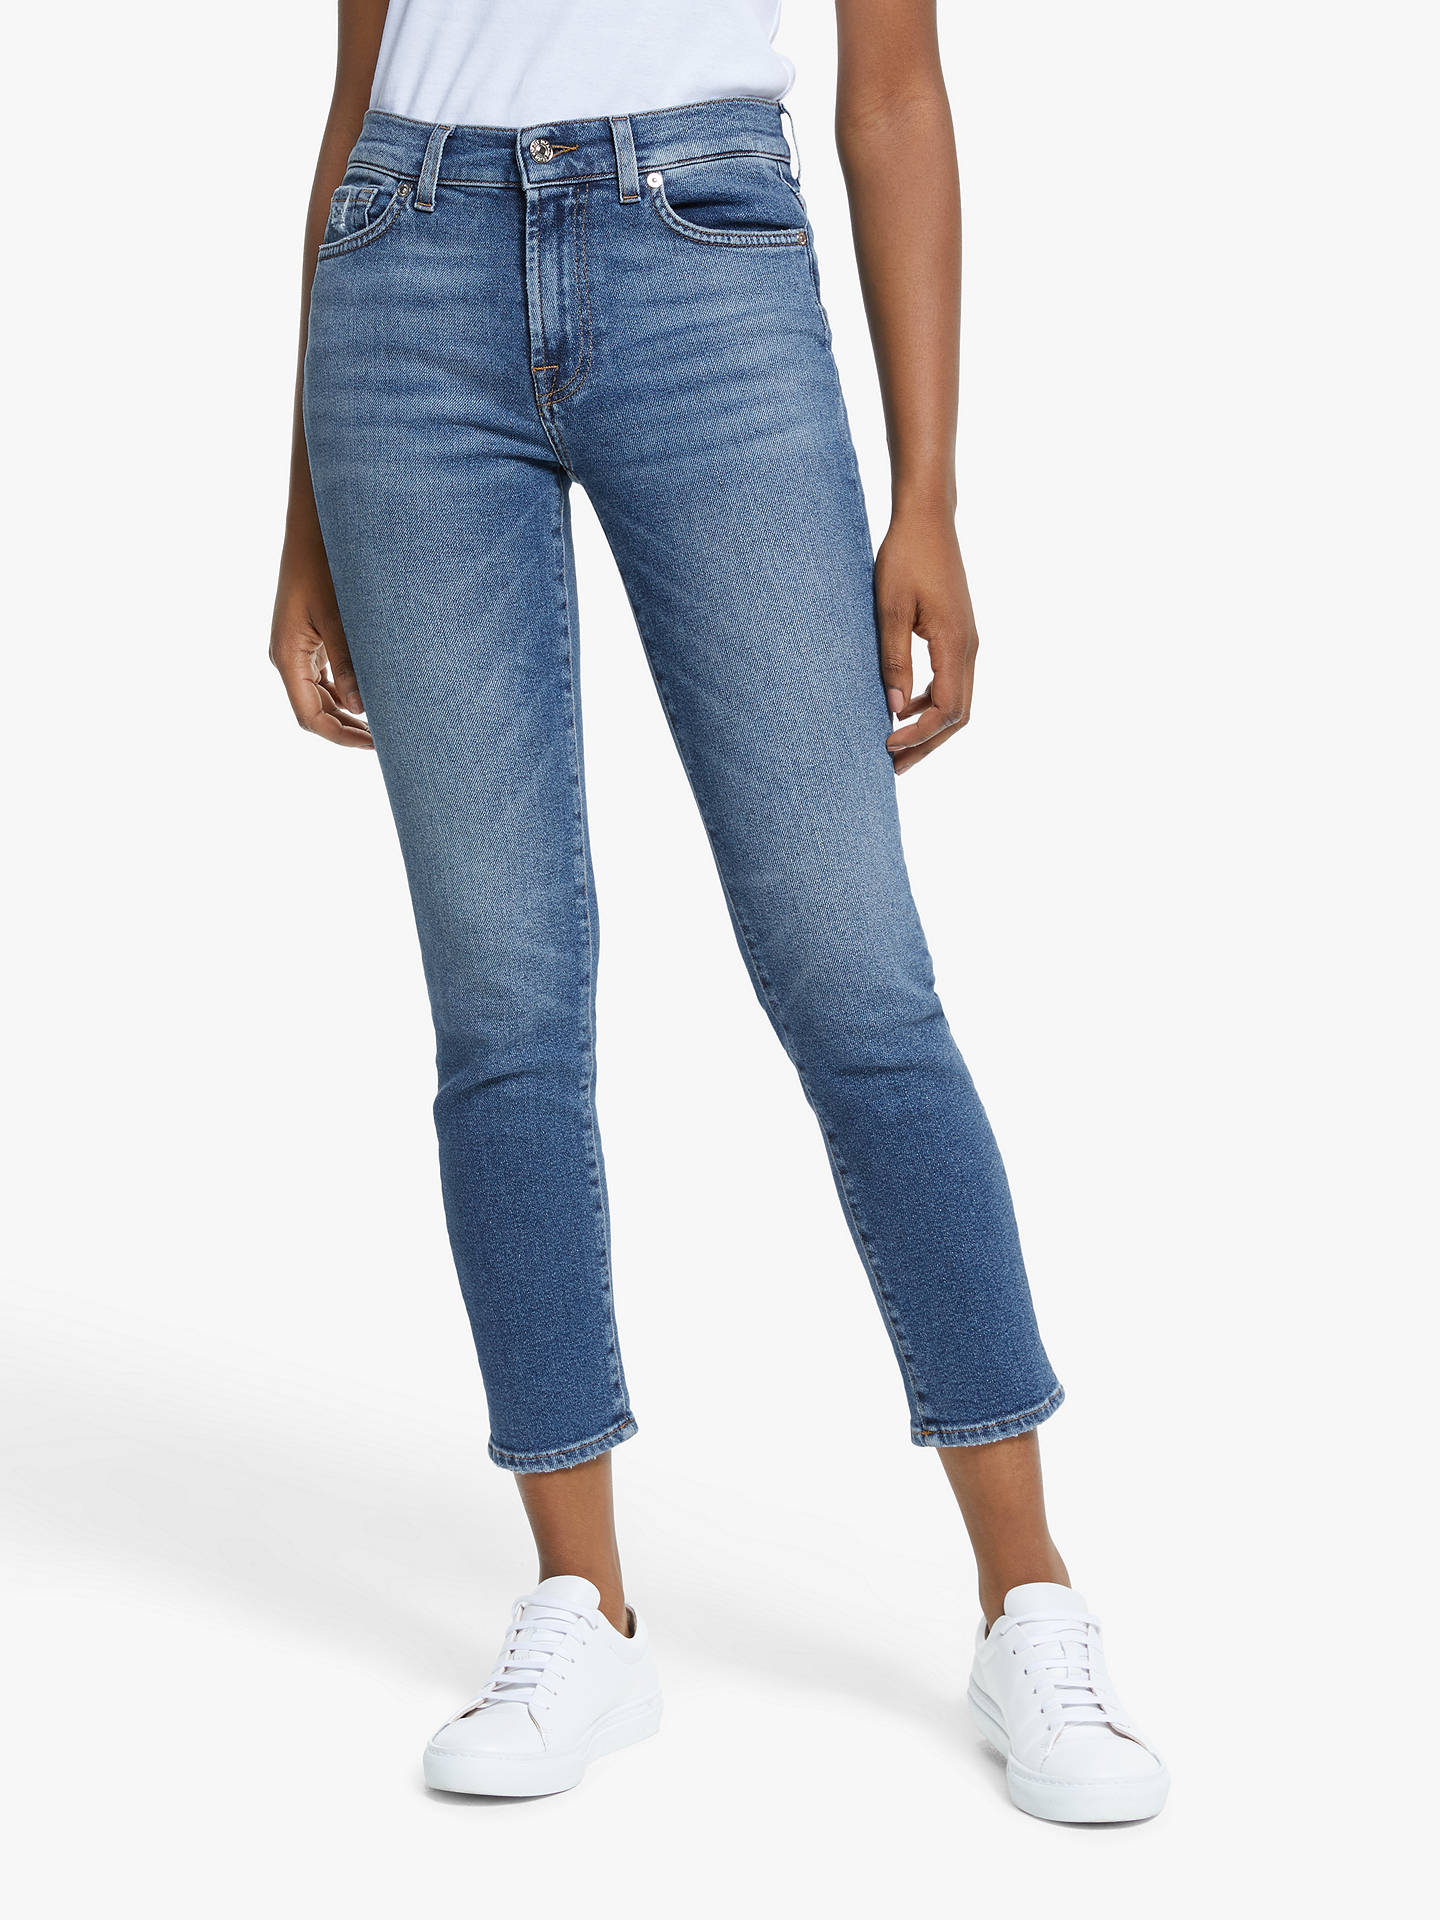 7 For All Mankind Roxanne Luxe Vintage Ankle Jeans, Capitola Mid Blue